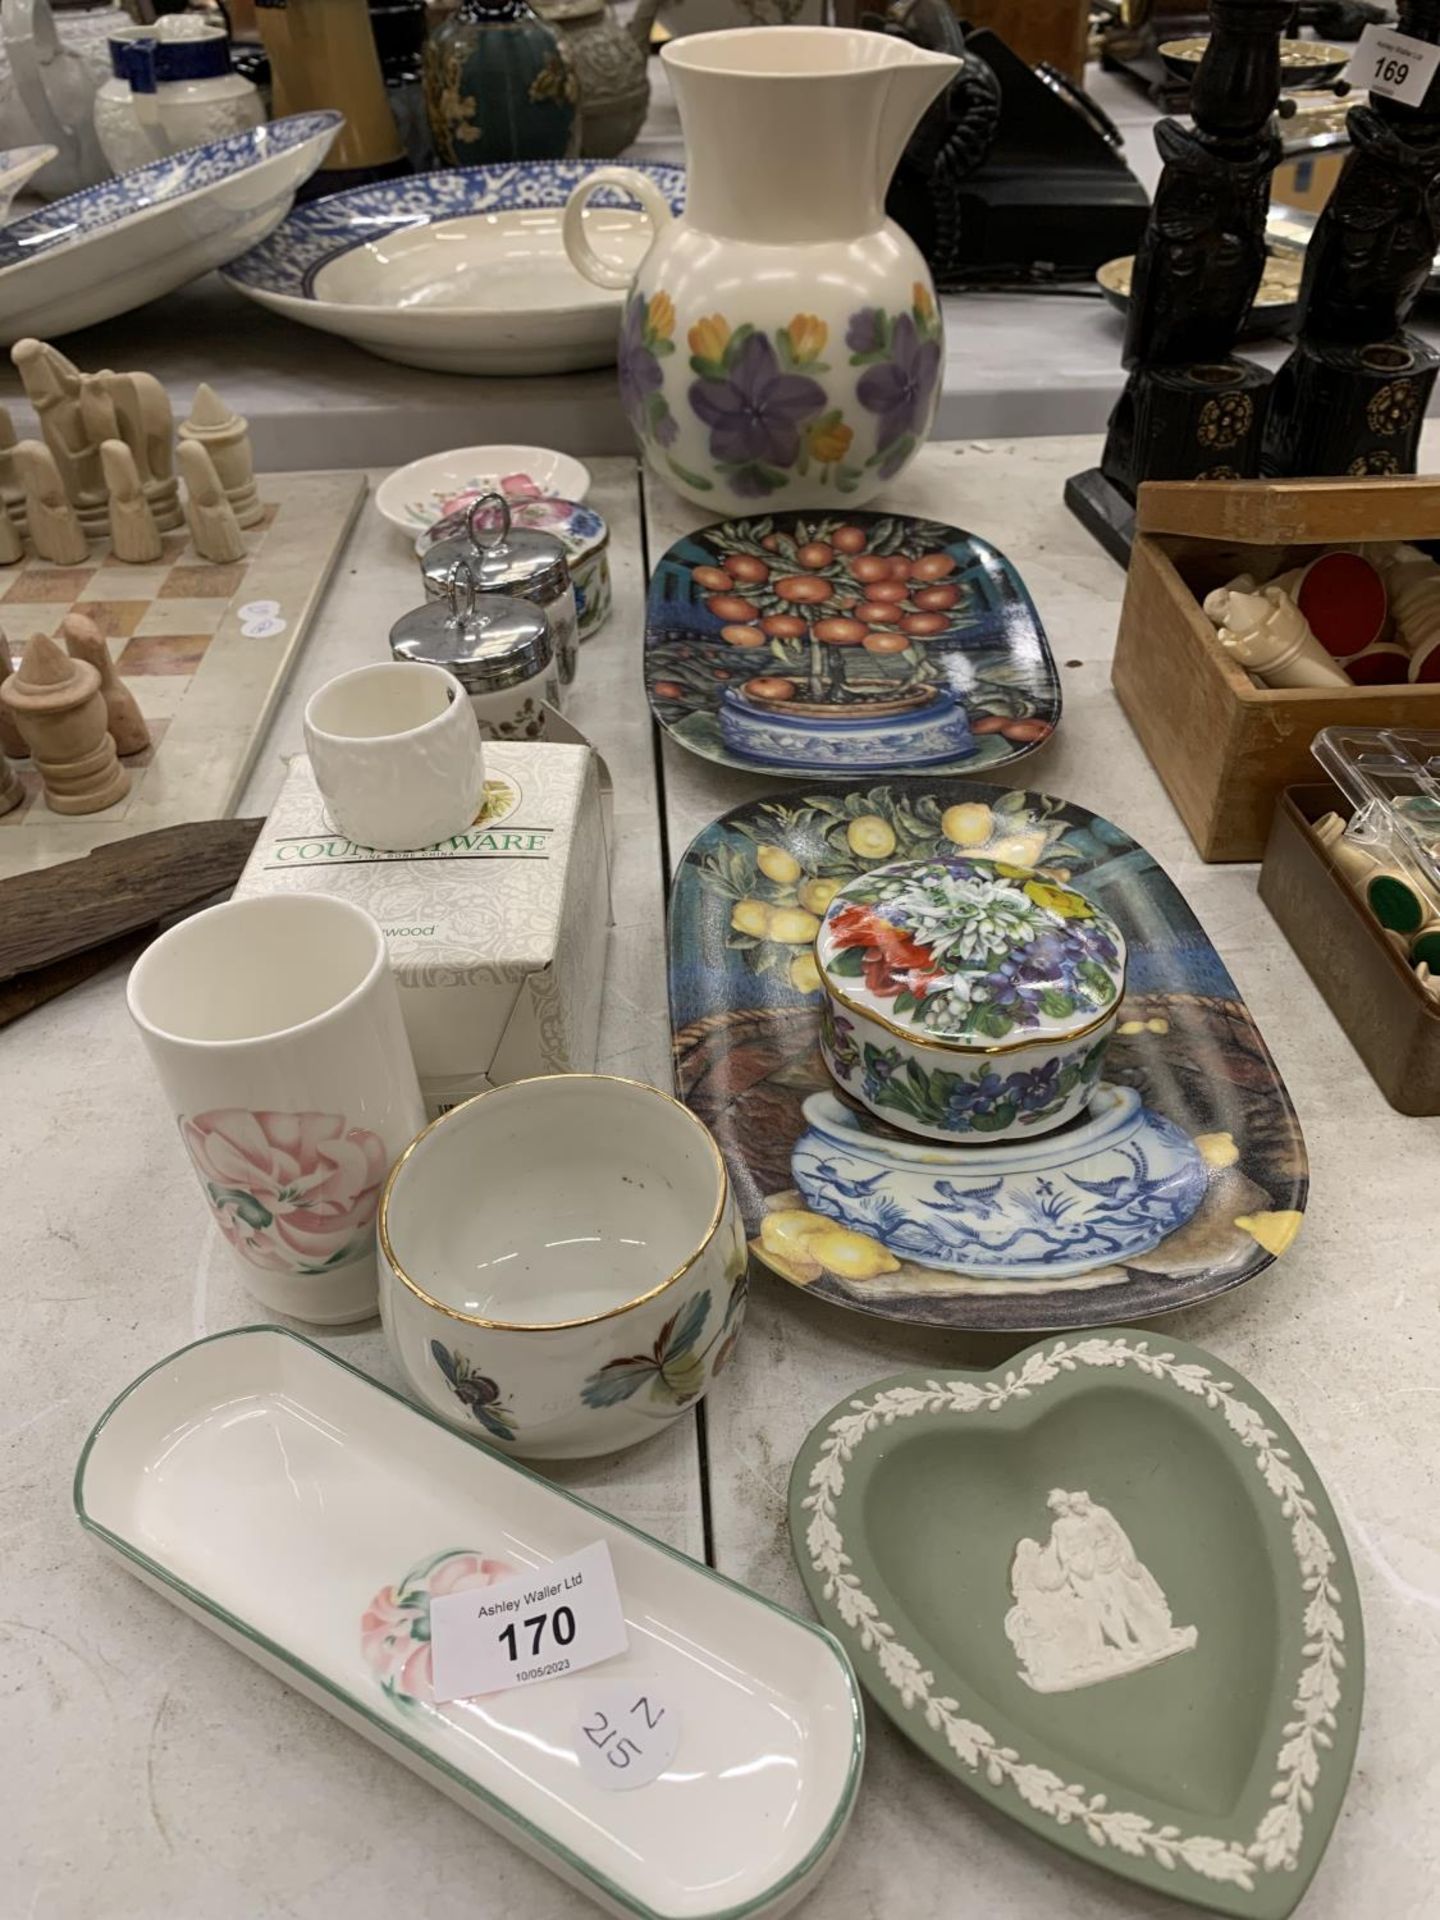 A QUATITY OF CERAMIC ITEMS TO INCLUDE ROYAL WORCESTER EGG CODDLERS, COLLECTABLE PLATES, WEDGWOOD